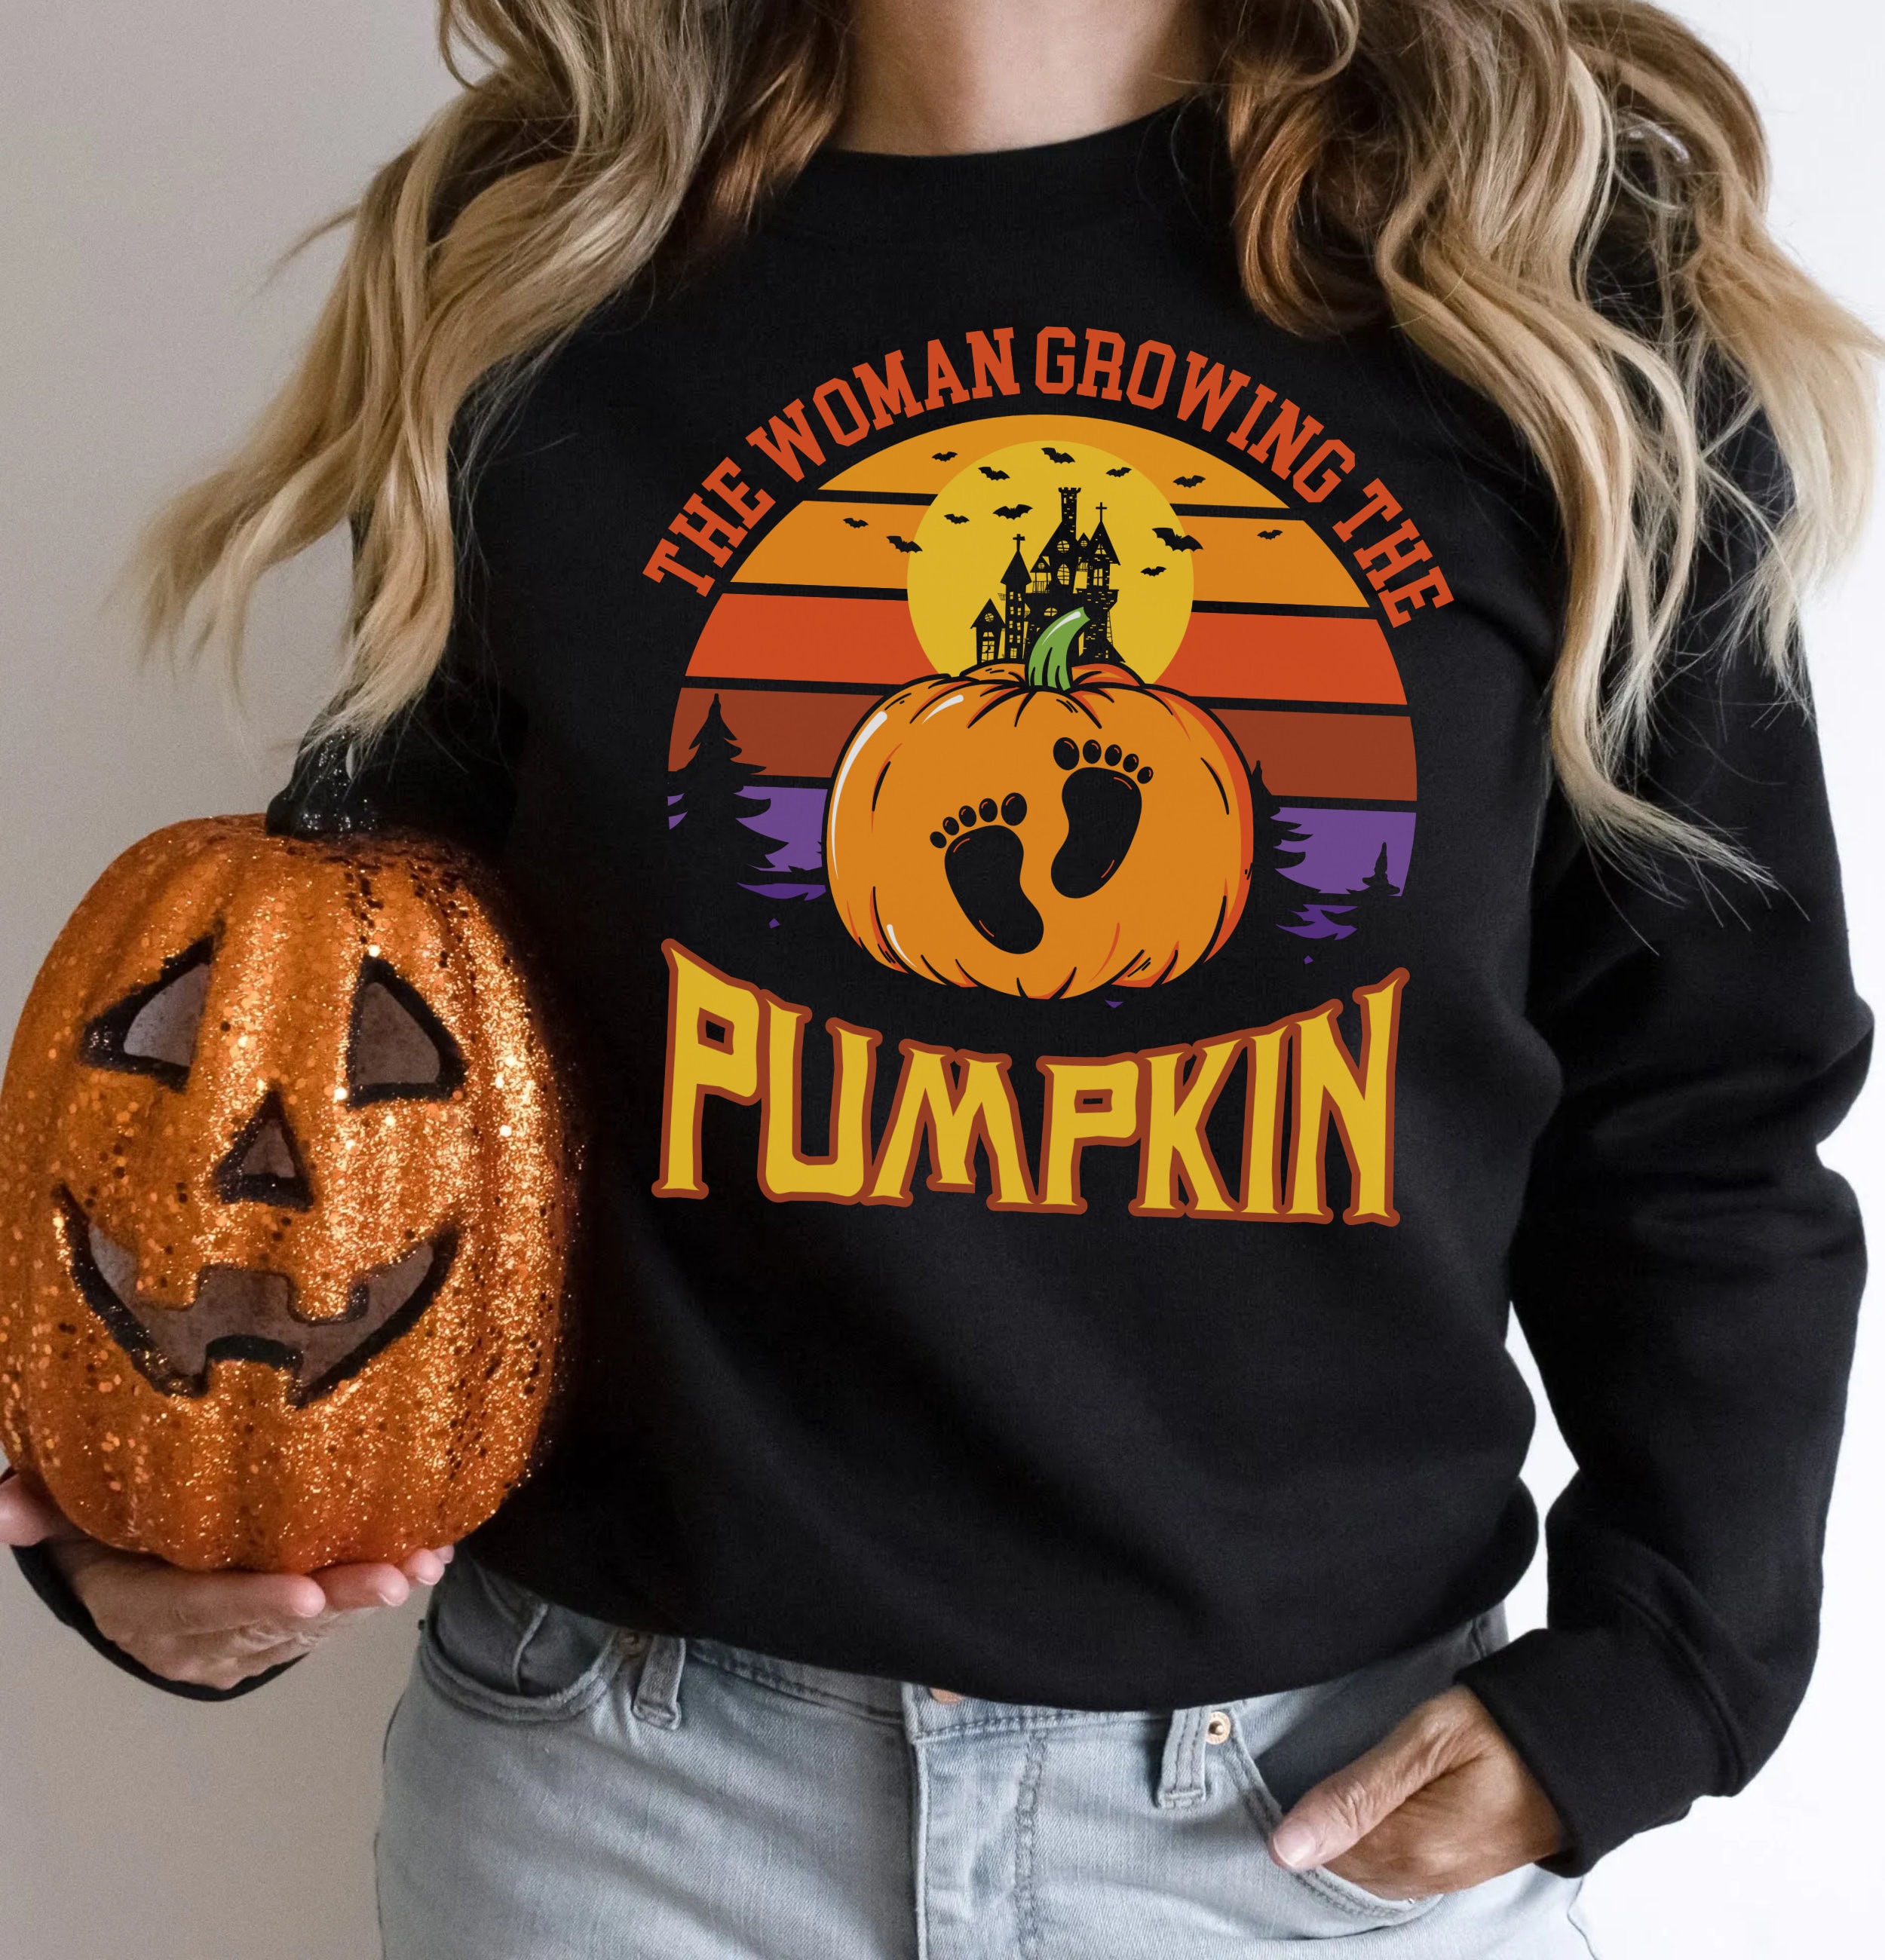 Discover Matching Halloween Couple Shirts, Funny Couples Costumes, Spooky Season Shirts for Couples, His and Hers Halloween Pajamas, Pumpkin T-shirt